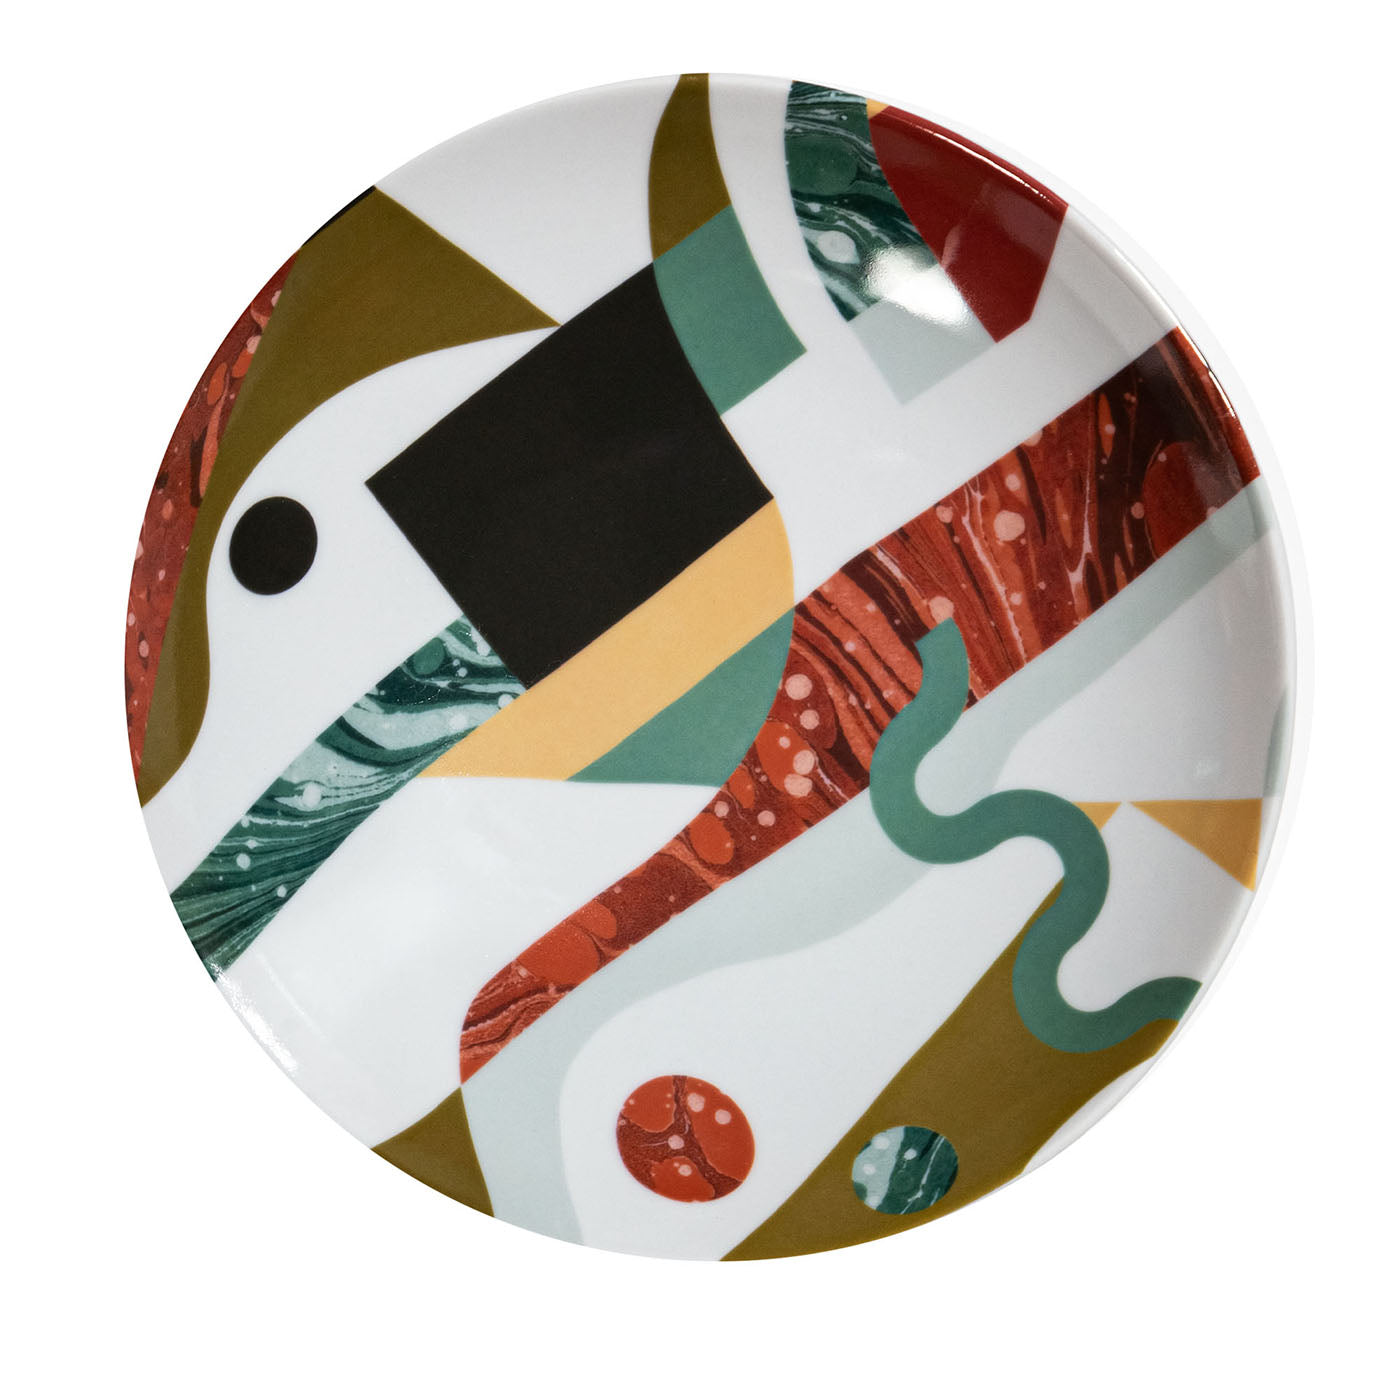 Alchimie Porcelain Soup Plate with Abstract Decor #1 - Main view